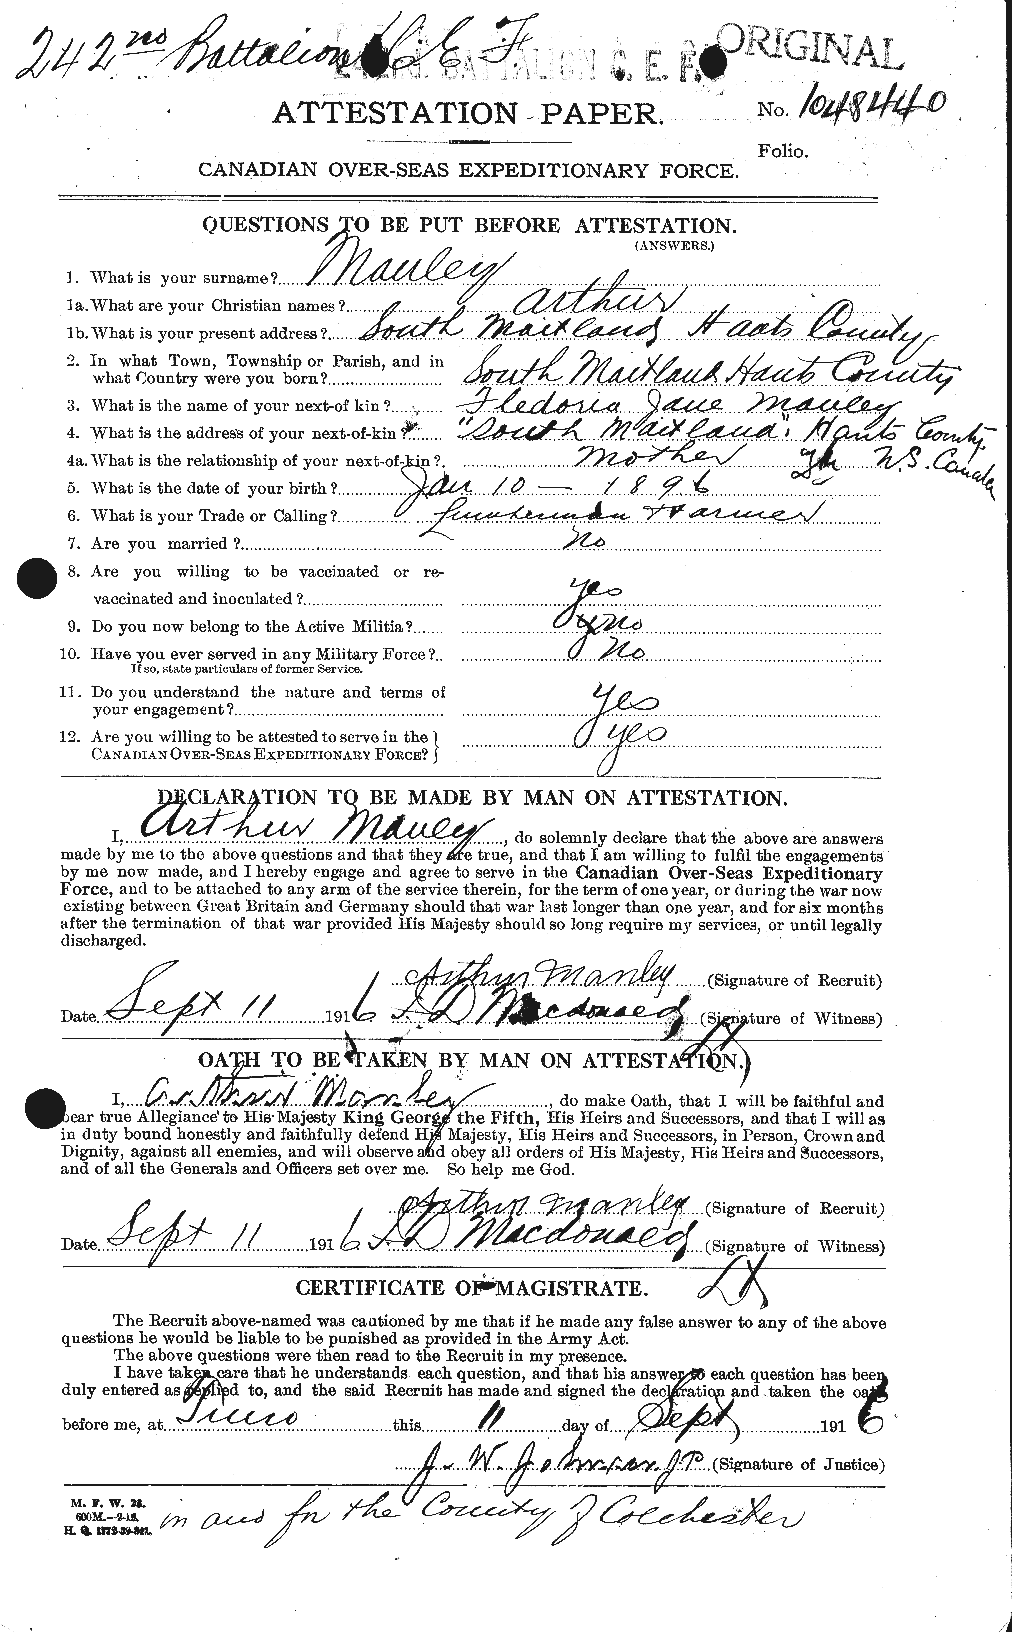 Personnel Records of the First World War - CEF 476986a